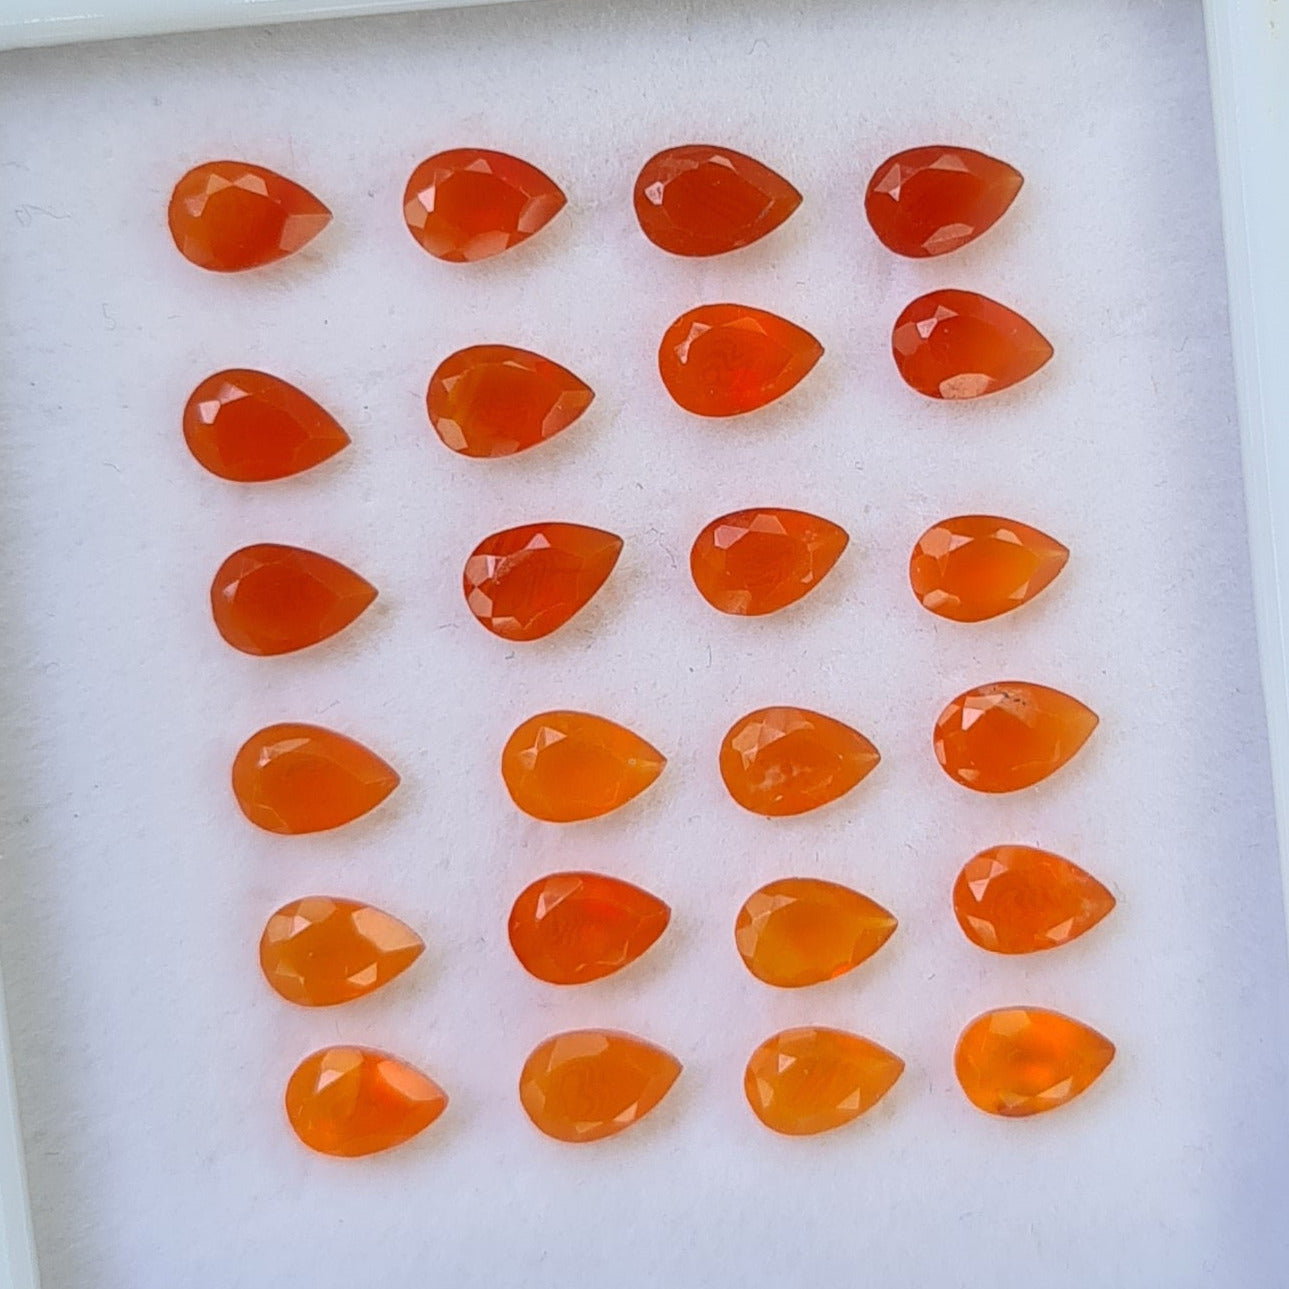 24 Pieces Natural Carnelian Faceted Gemstone Pear Shape |  Size 8x6mm - The LabradoriteKing